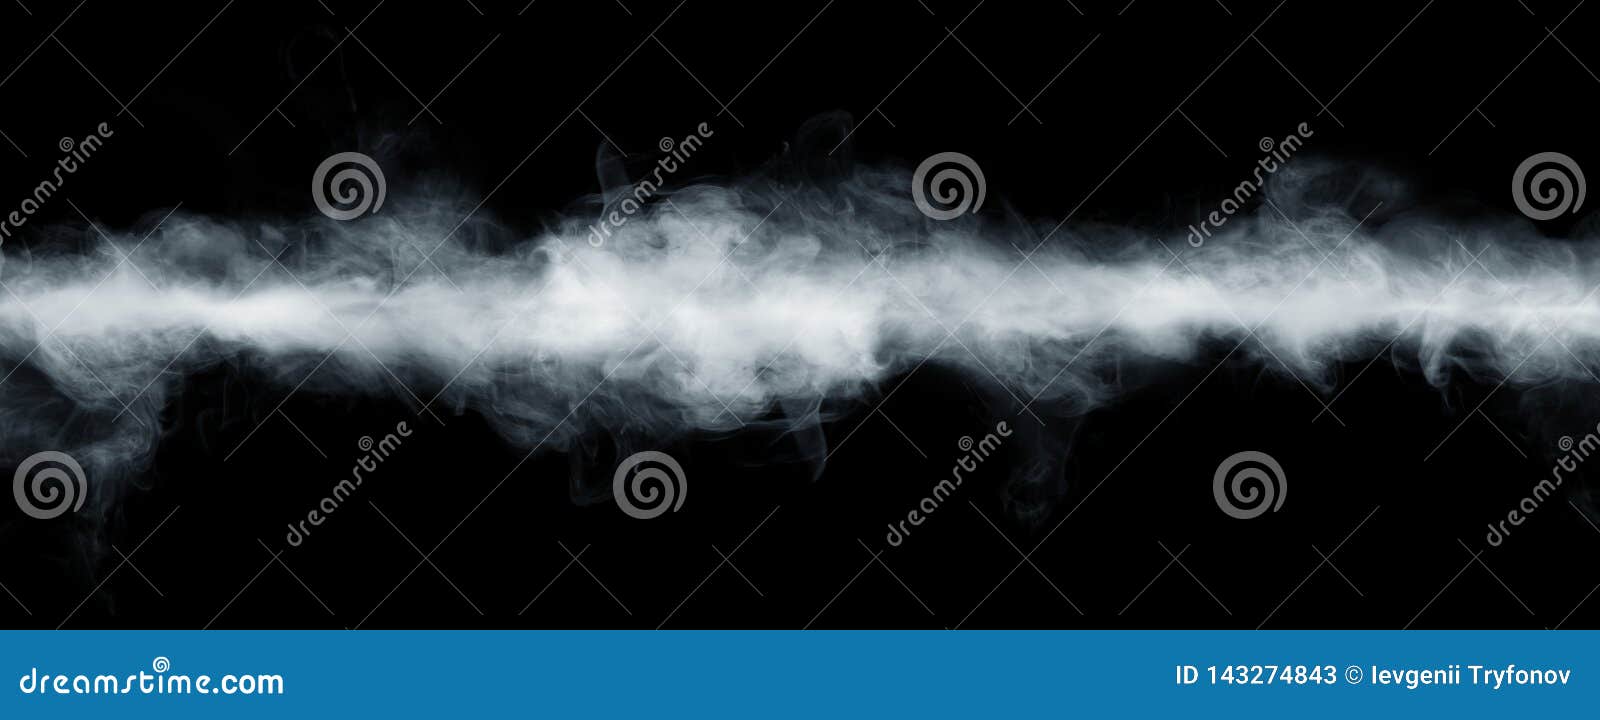 panoramic view of the abstract fog or smoke move on black background. white cloudiness, mist or smog background